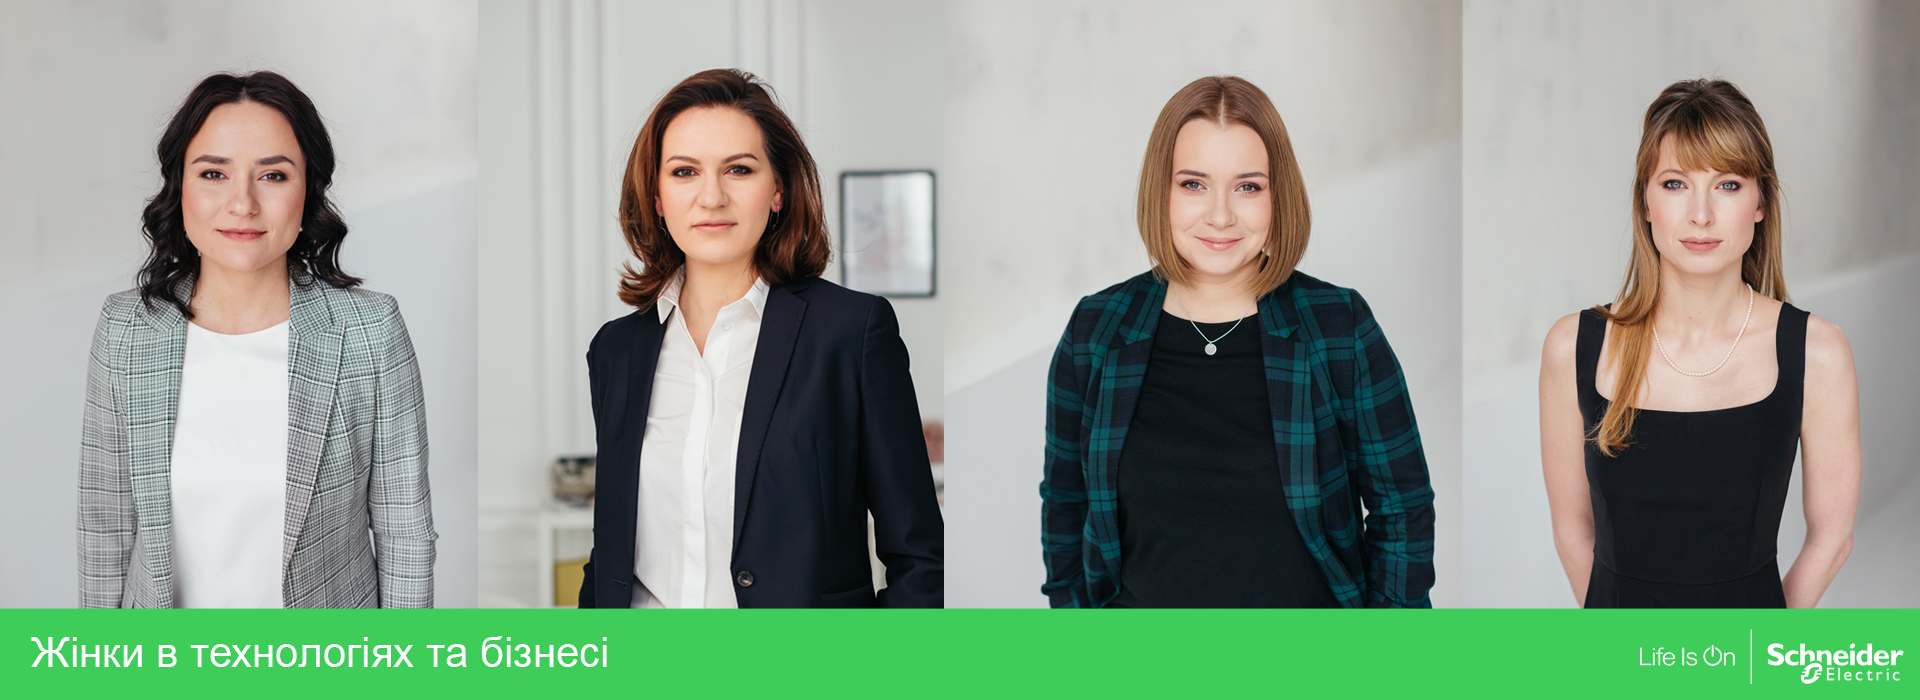 Women Leadership in Business and Technologies: Real Cases From Schneider Electric Team